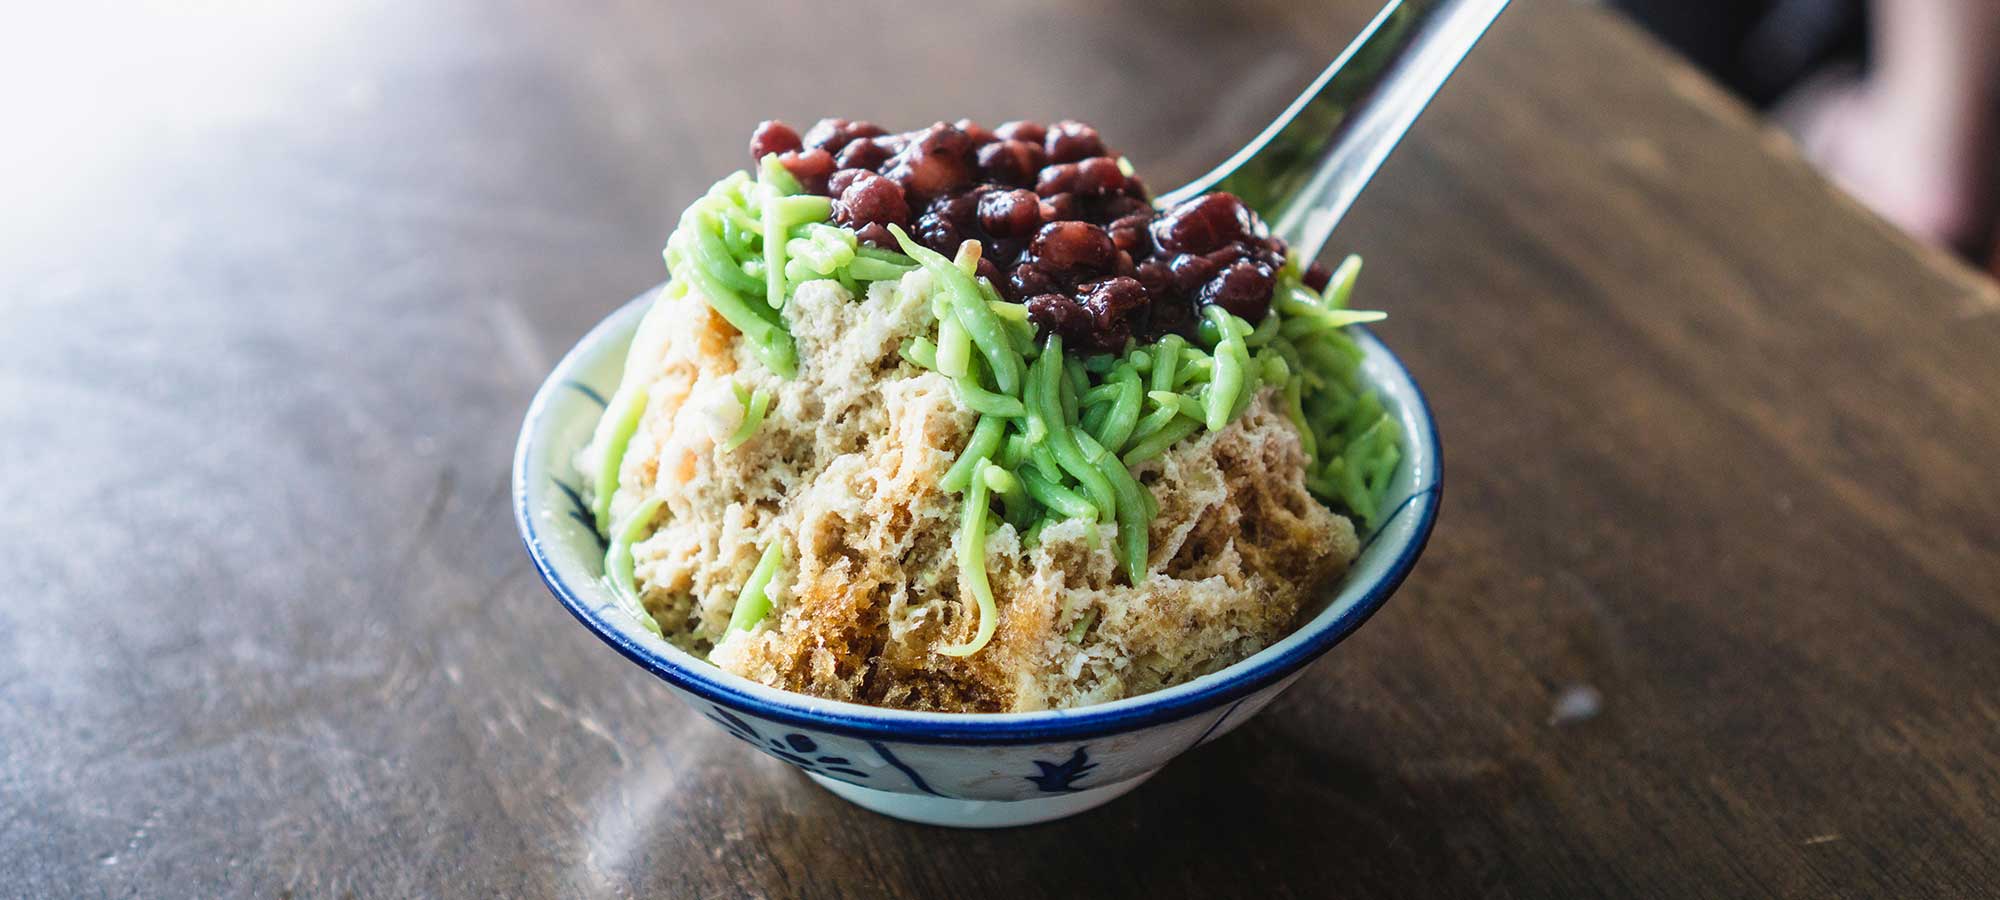 Cendol Is the Signature Sweet of Malaysia | Saveur